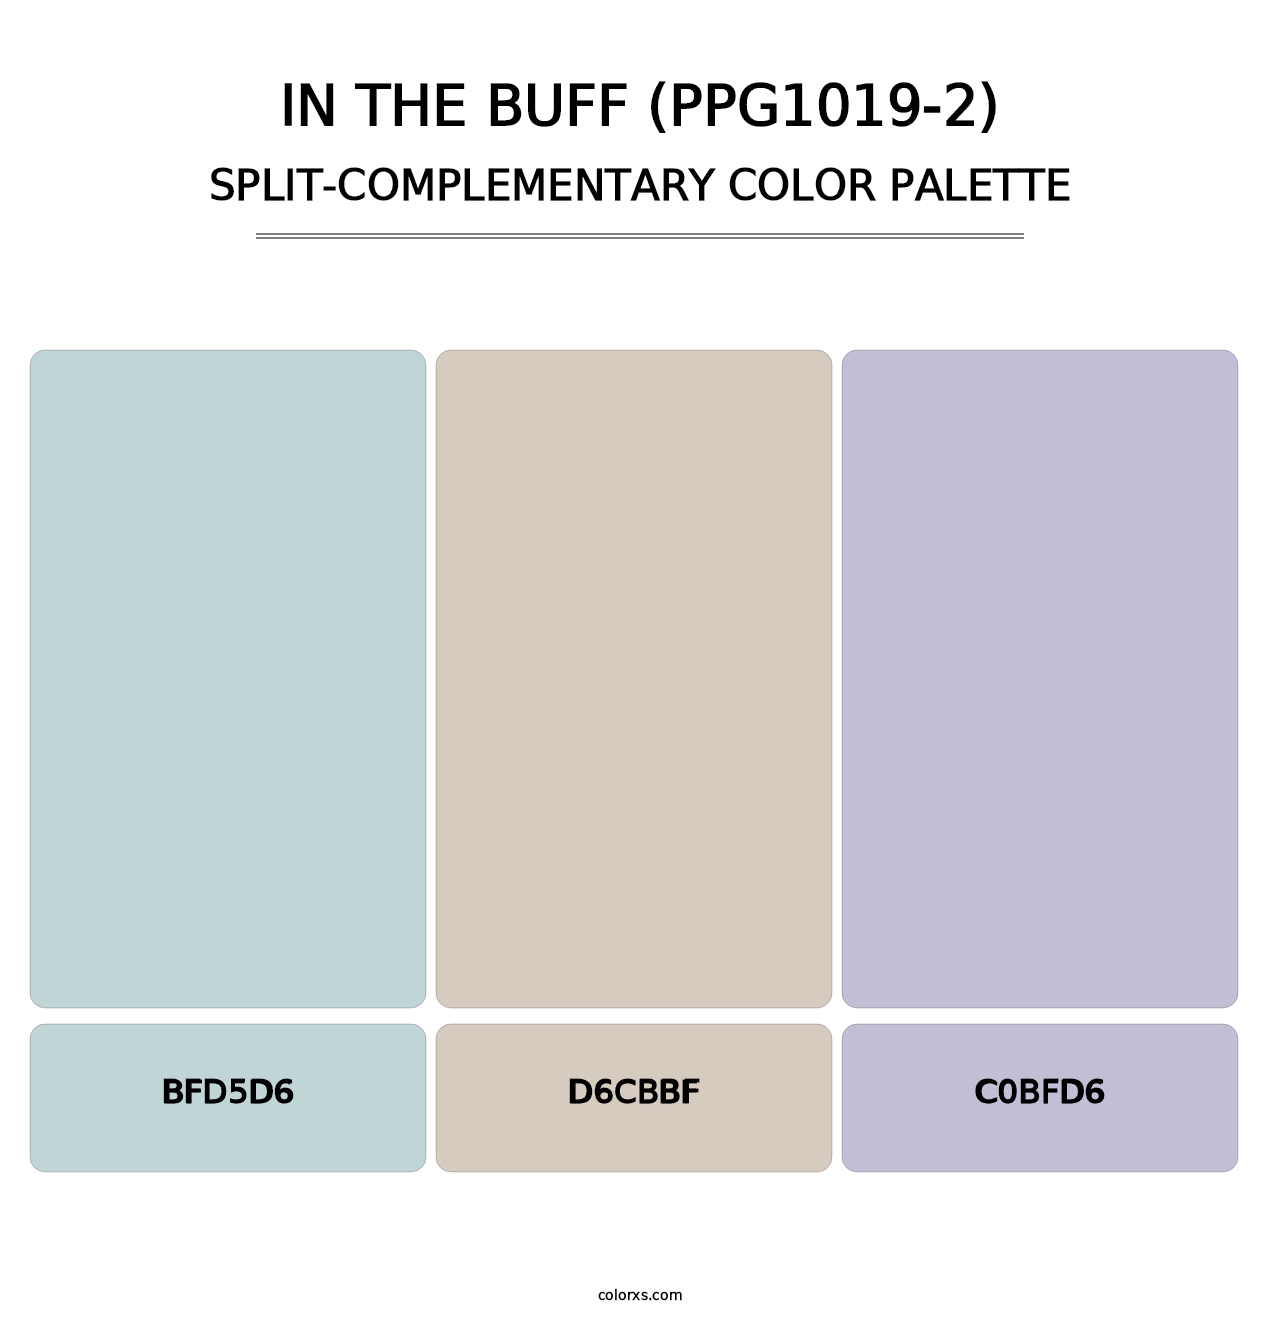 In The Buff (PPG1019-2) - Split-Complementary Color Palette